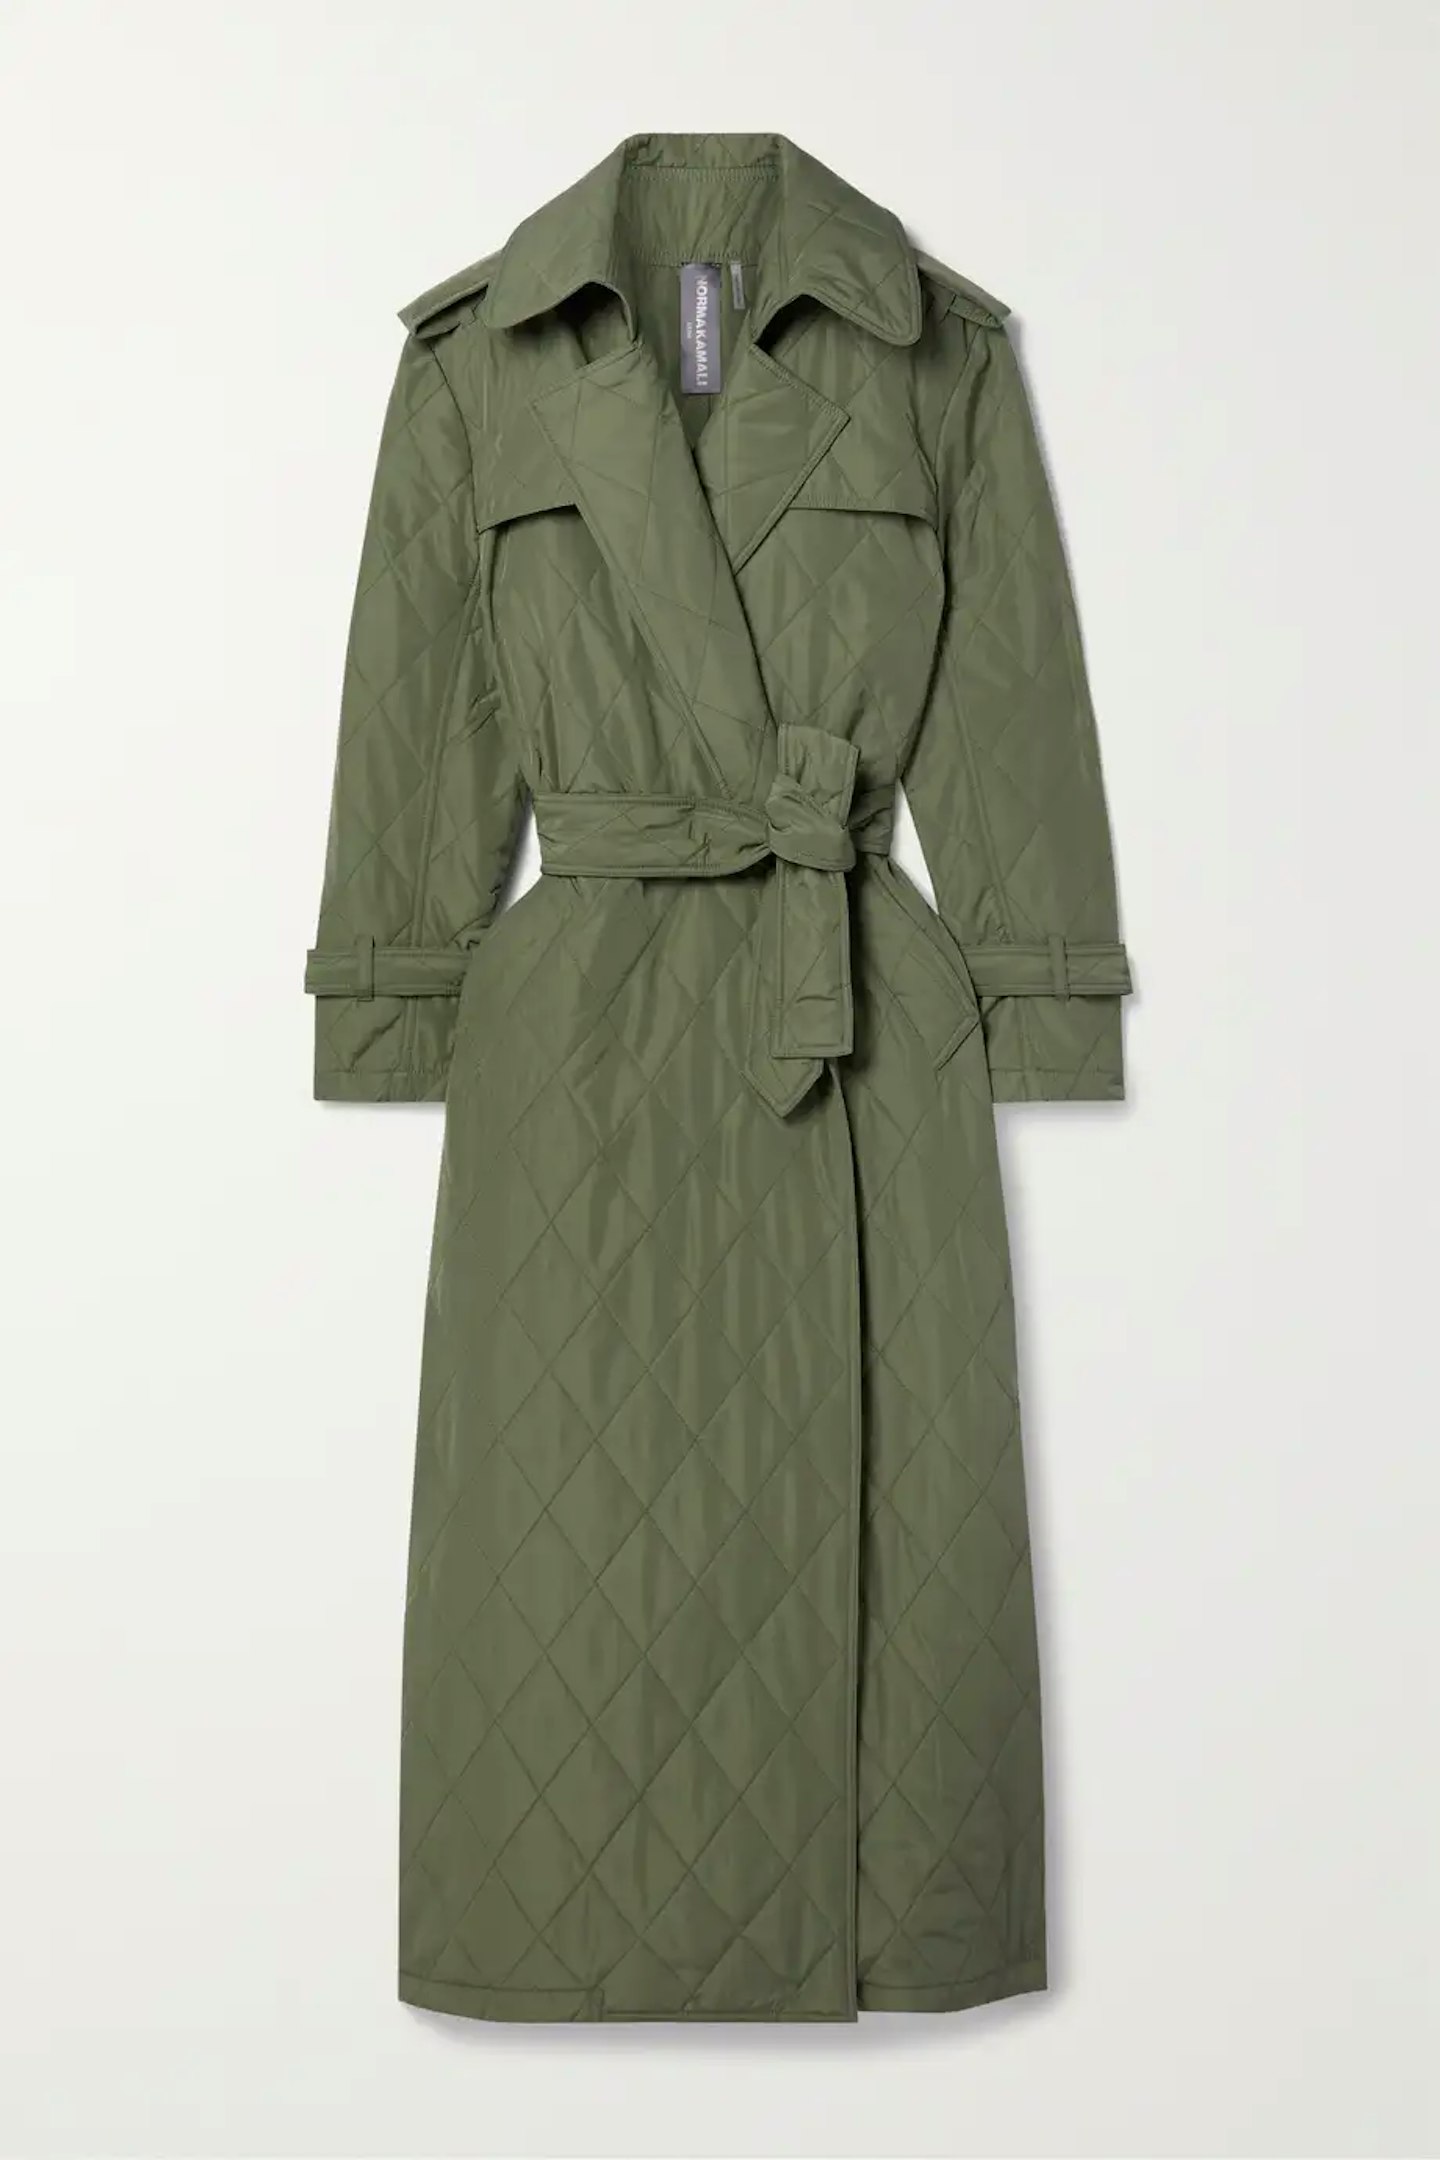 Norma Kamali, Belted Quilted Shell Trench Coat